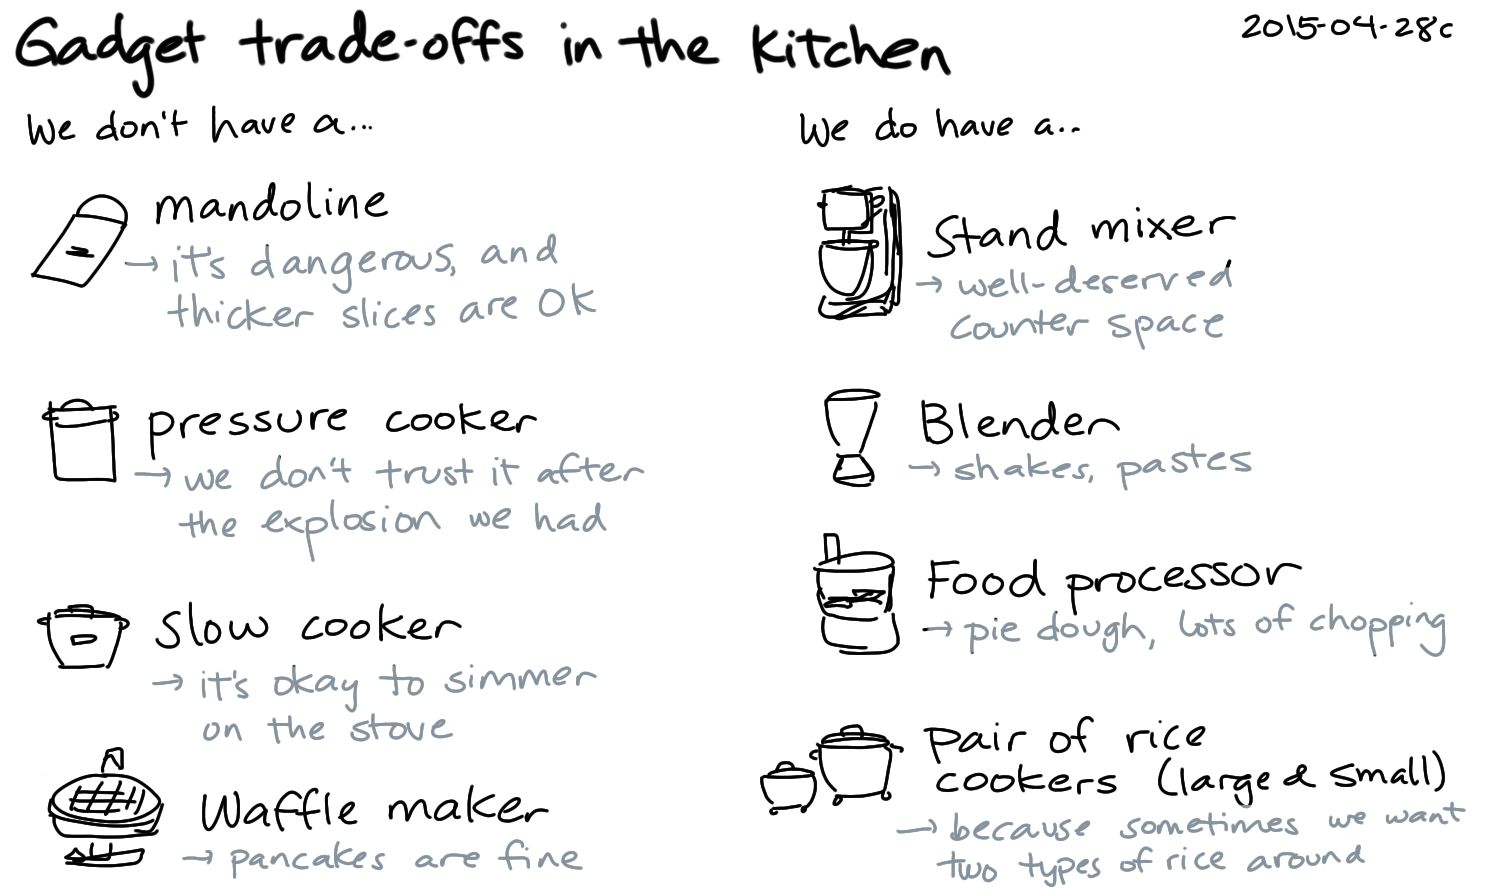 2015-04-28c Gadget trade-offs in the kitchen -- index card #tech-and-home #technodomesticity #tradeoffs #gadgets #kitchen #cooking #decision.png